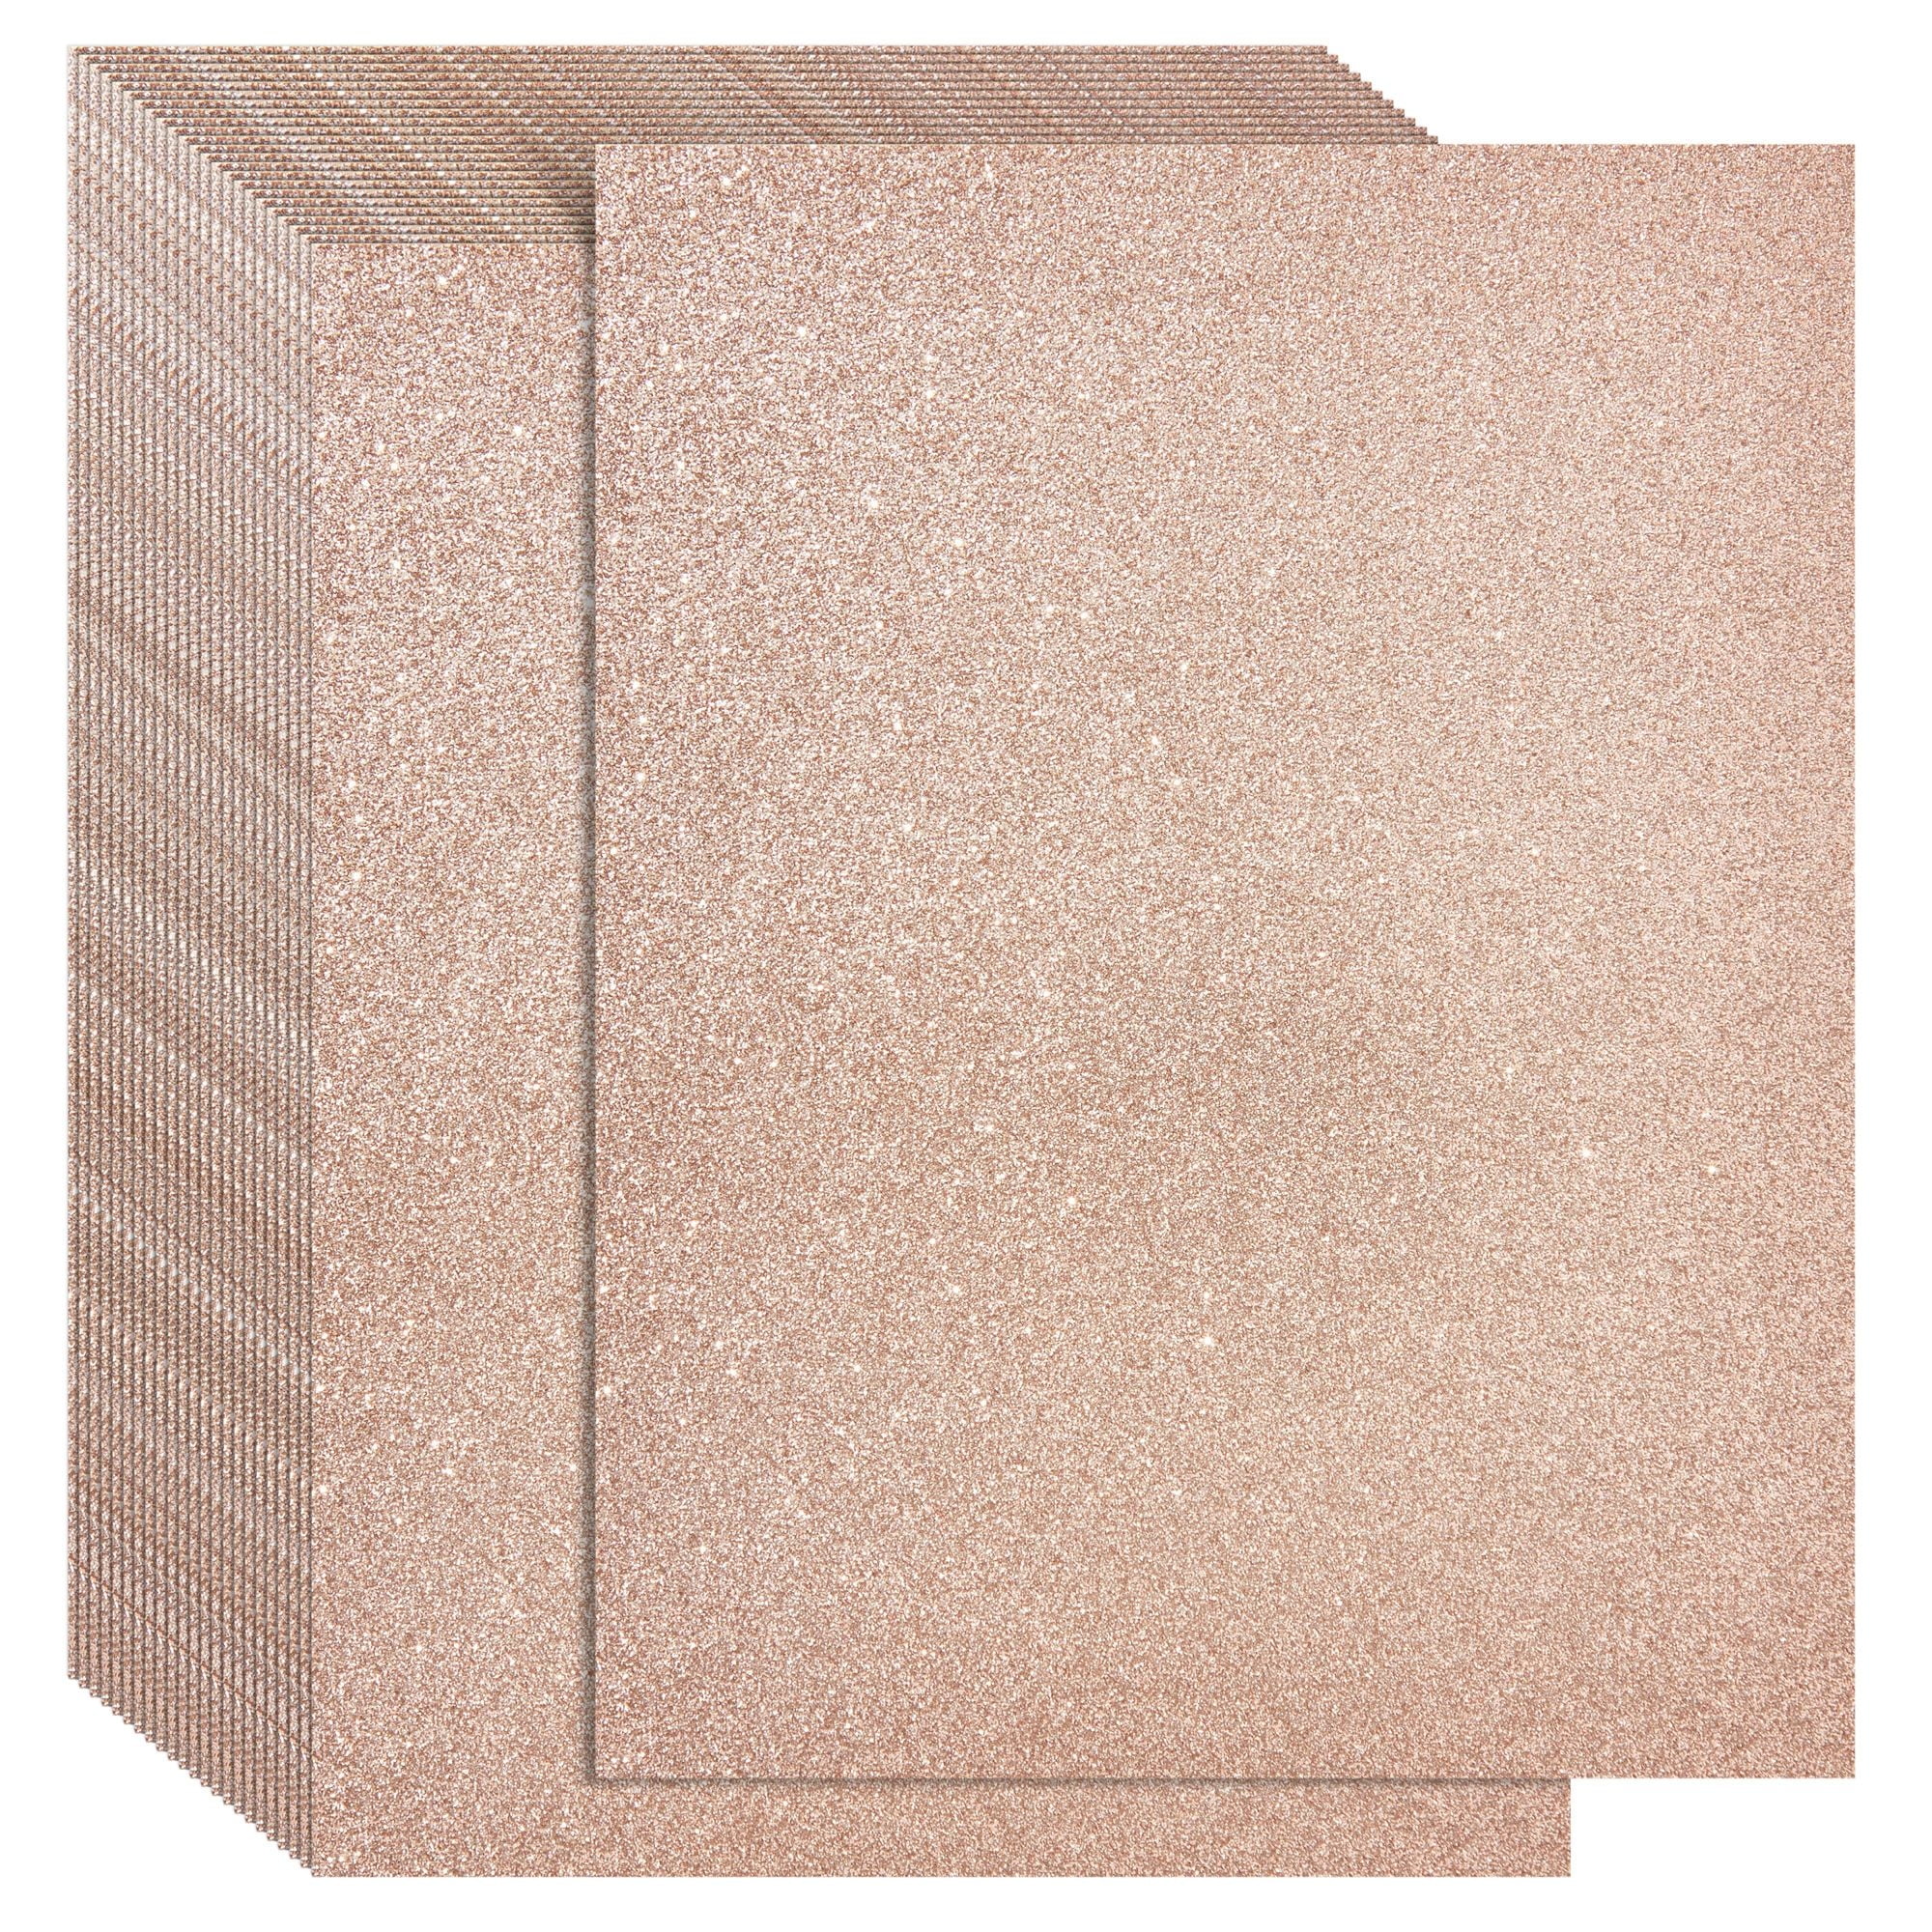 Gold Glitter 8.5 x 11 Cardstock Paper by Recollections™, 24 Sheets